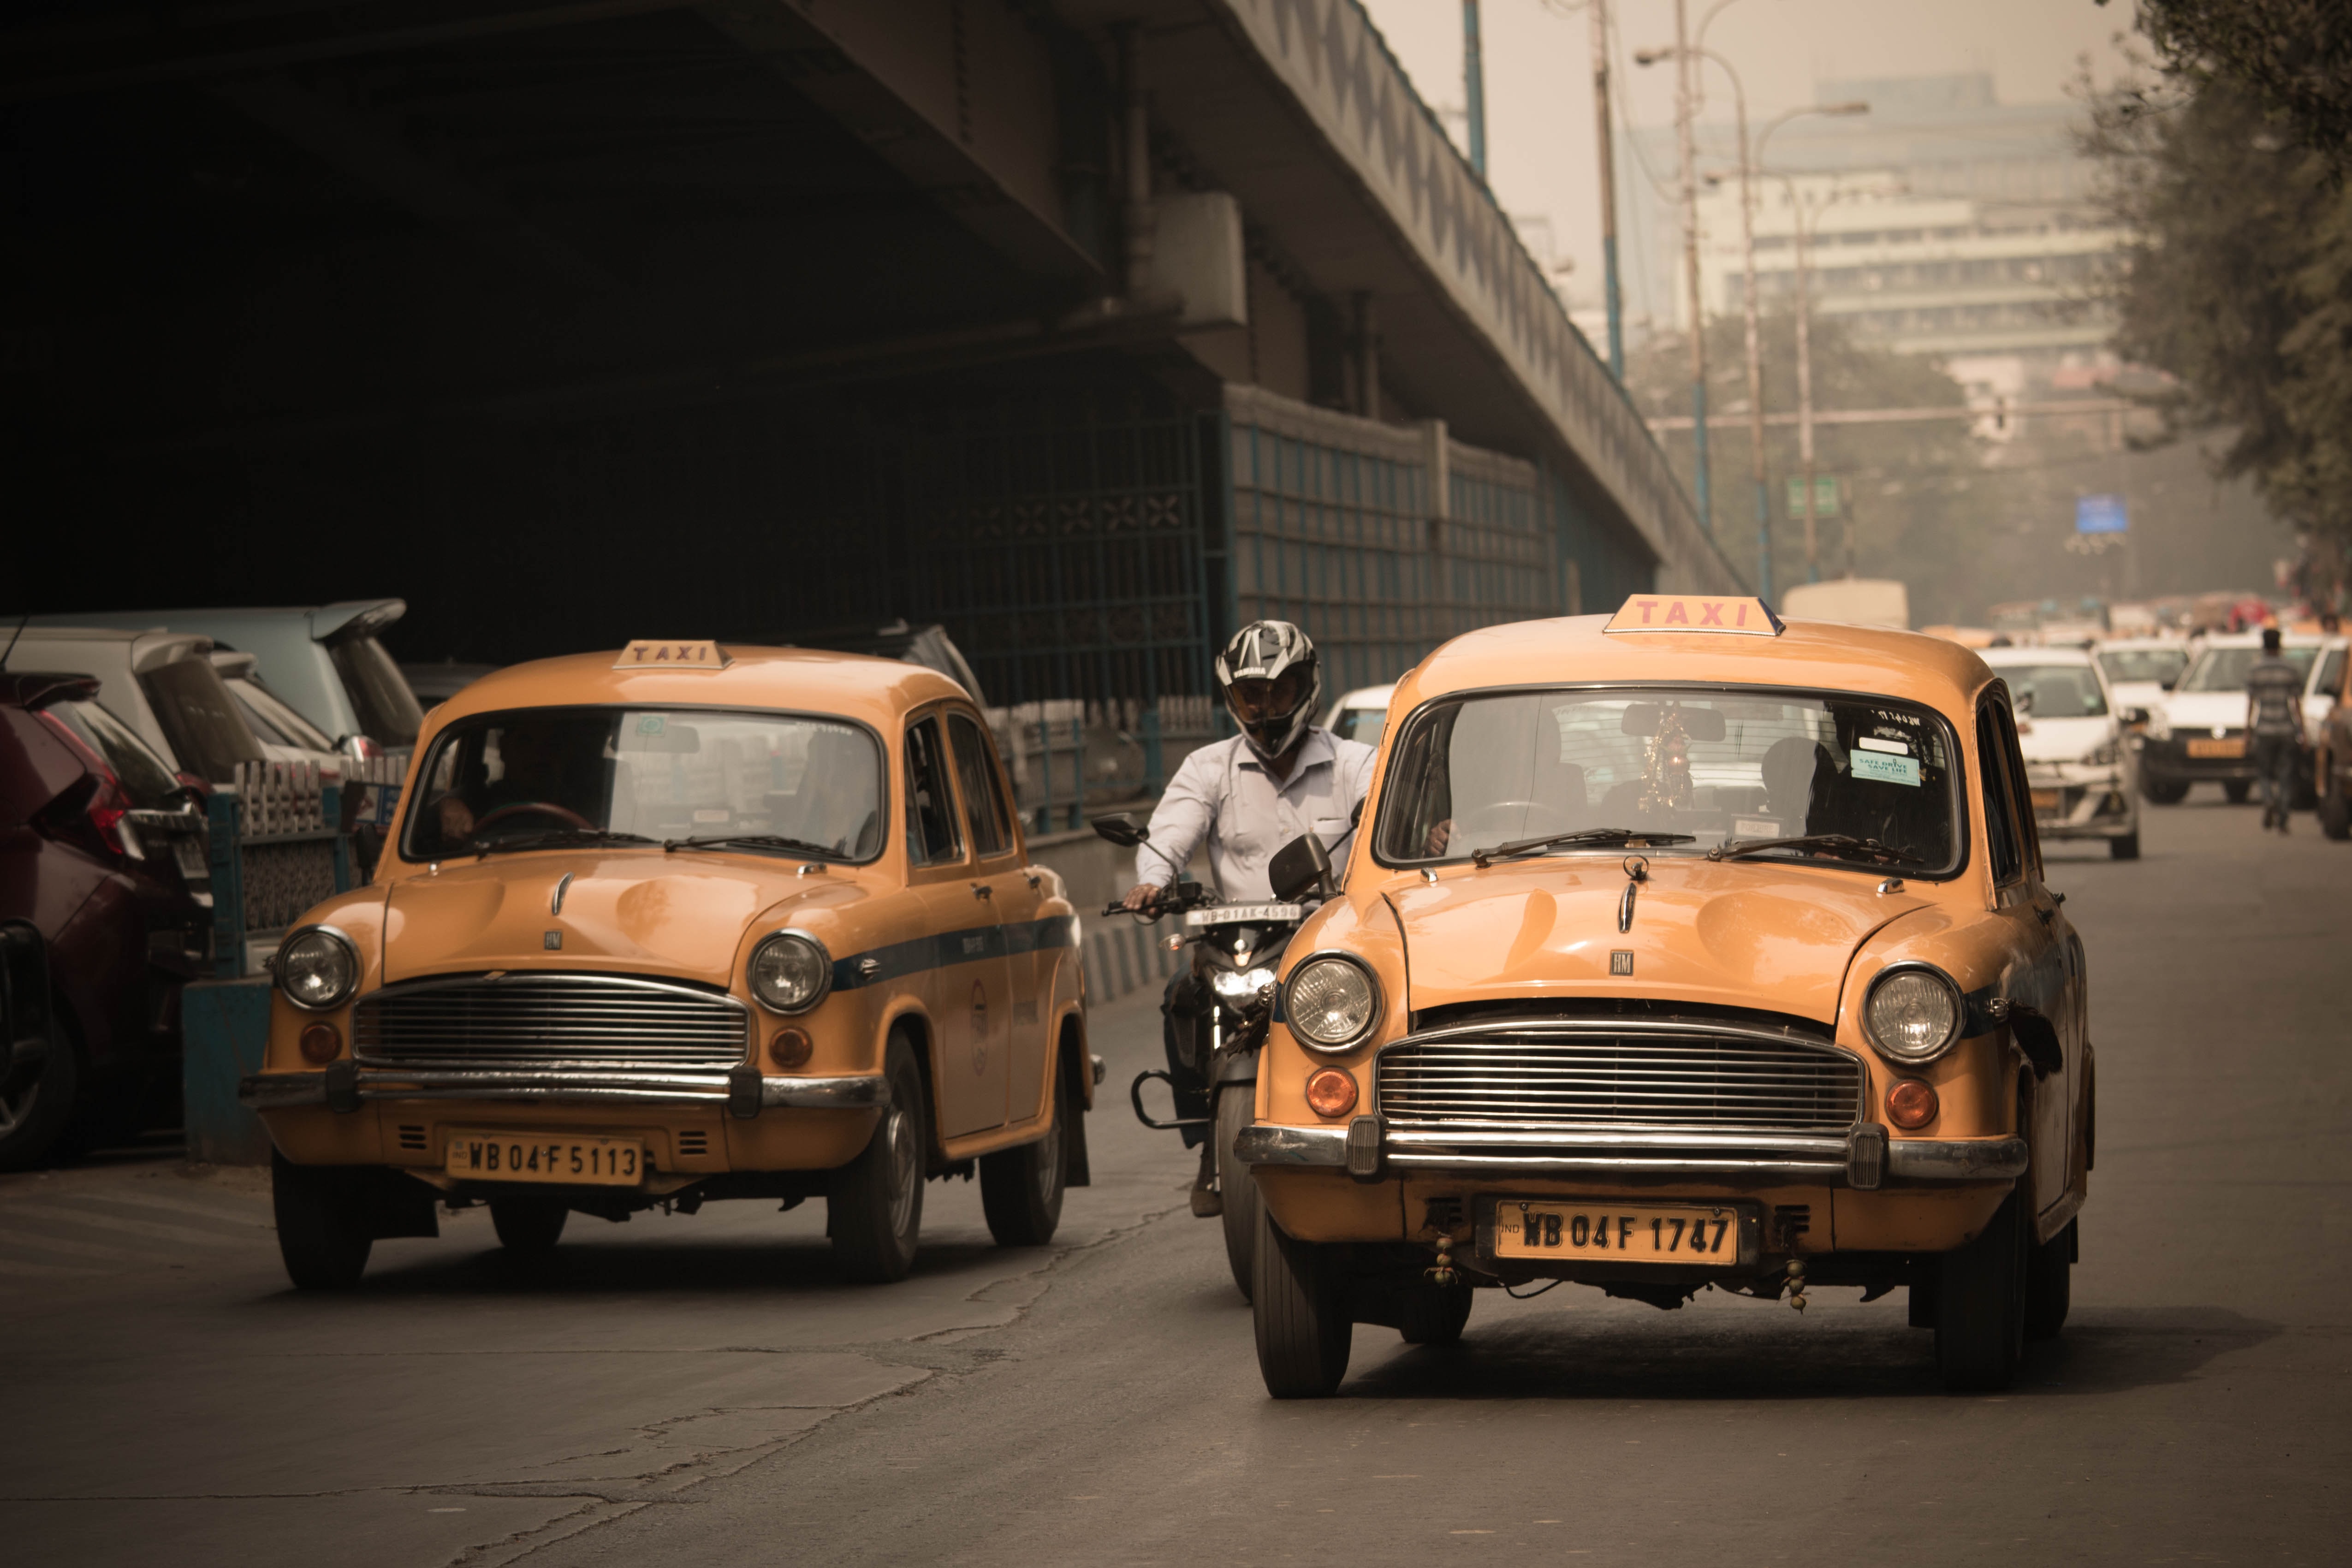 Taxi or cab services in India